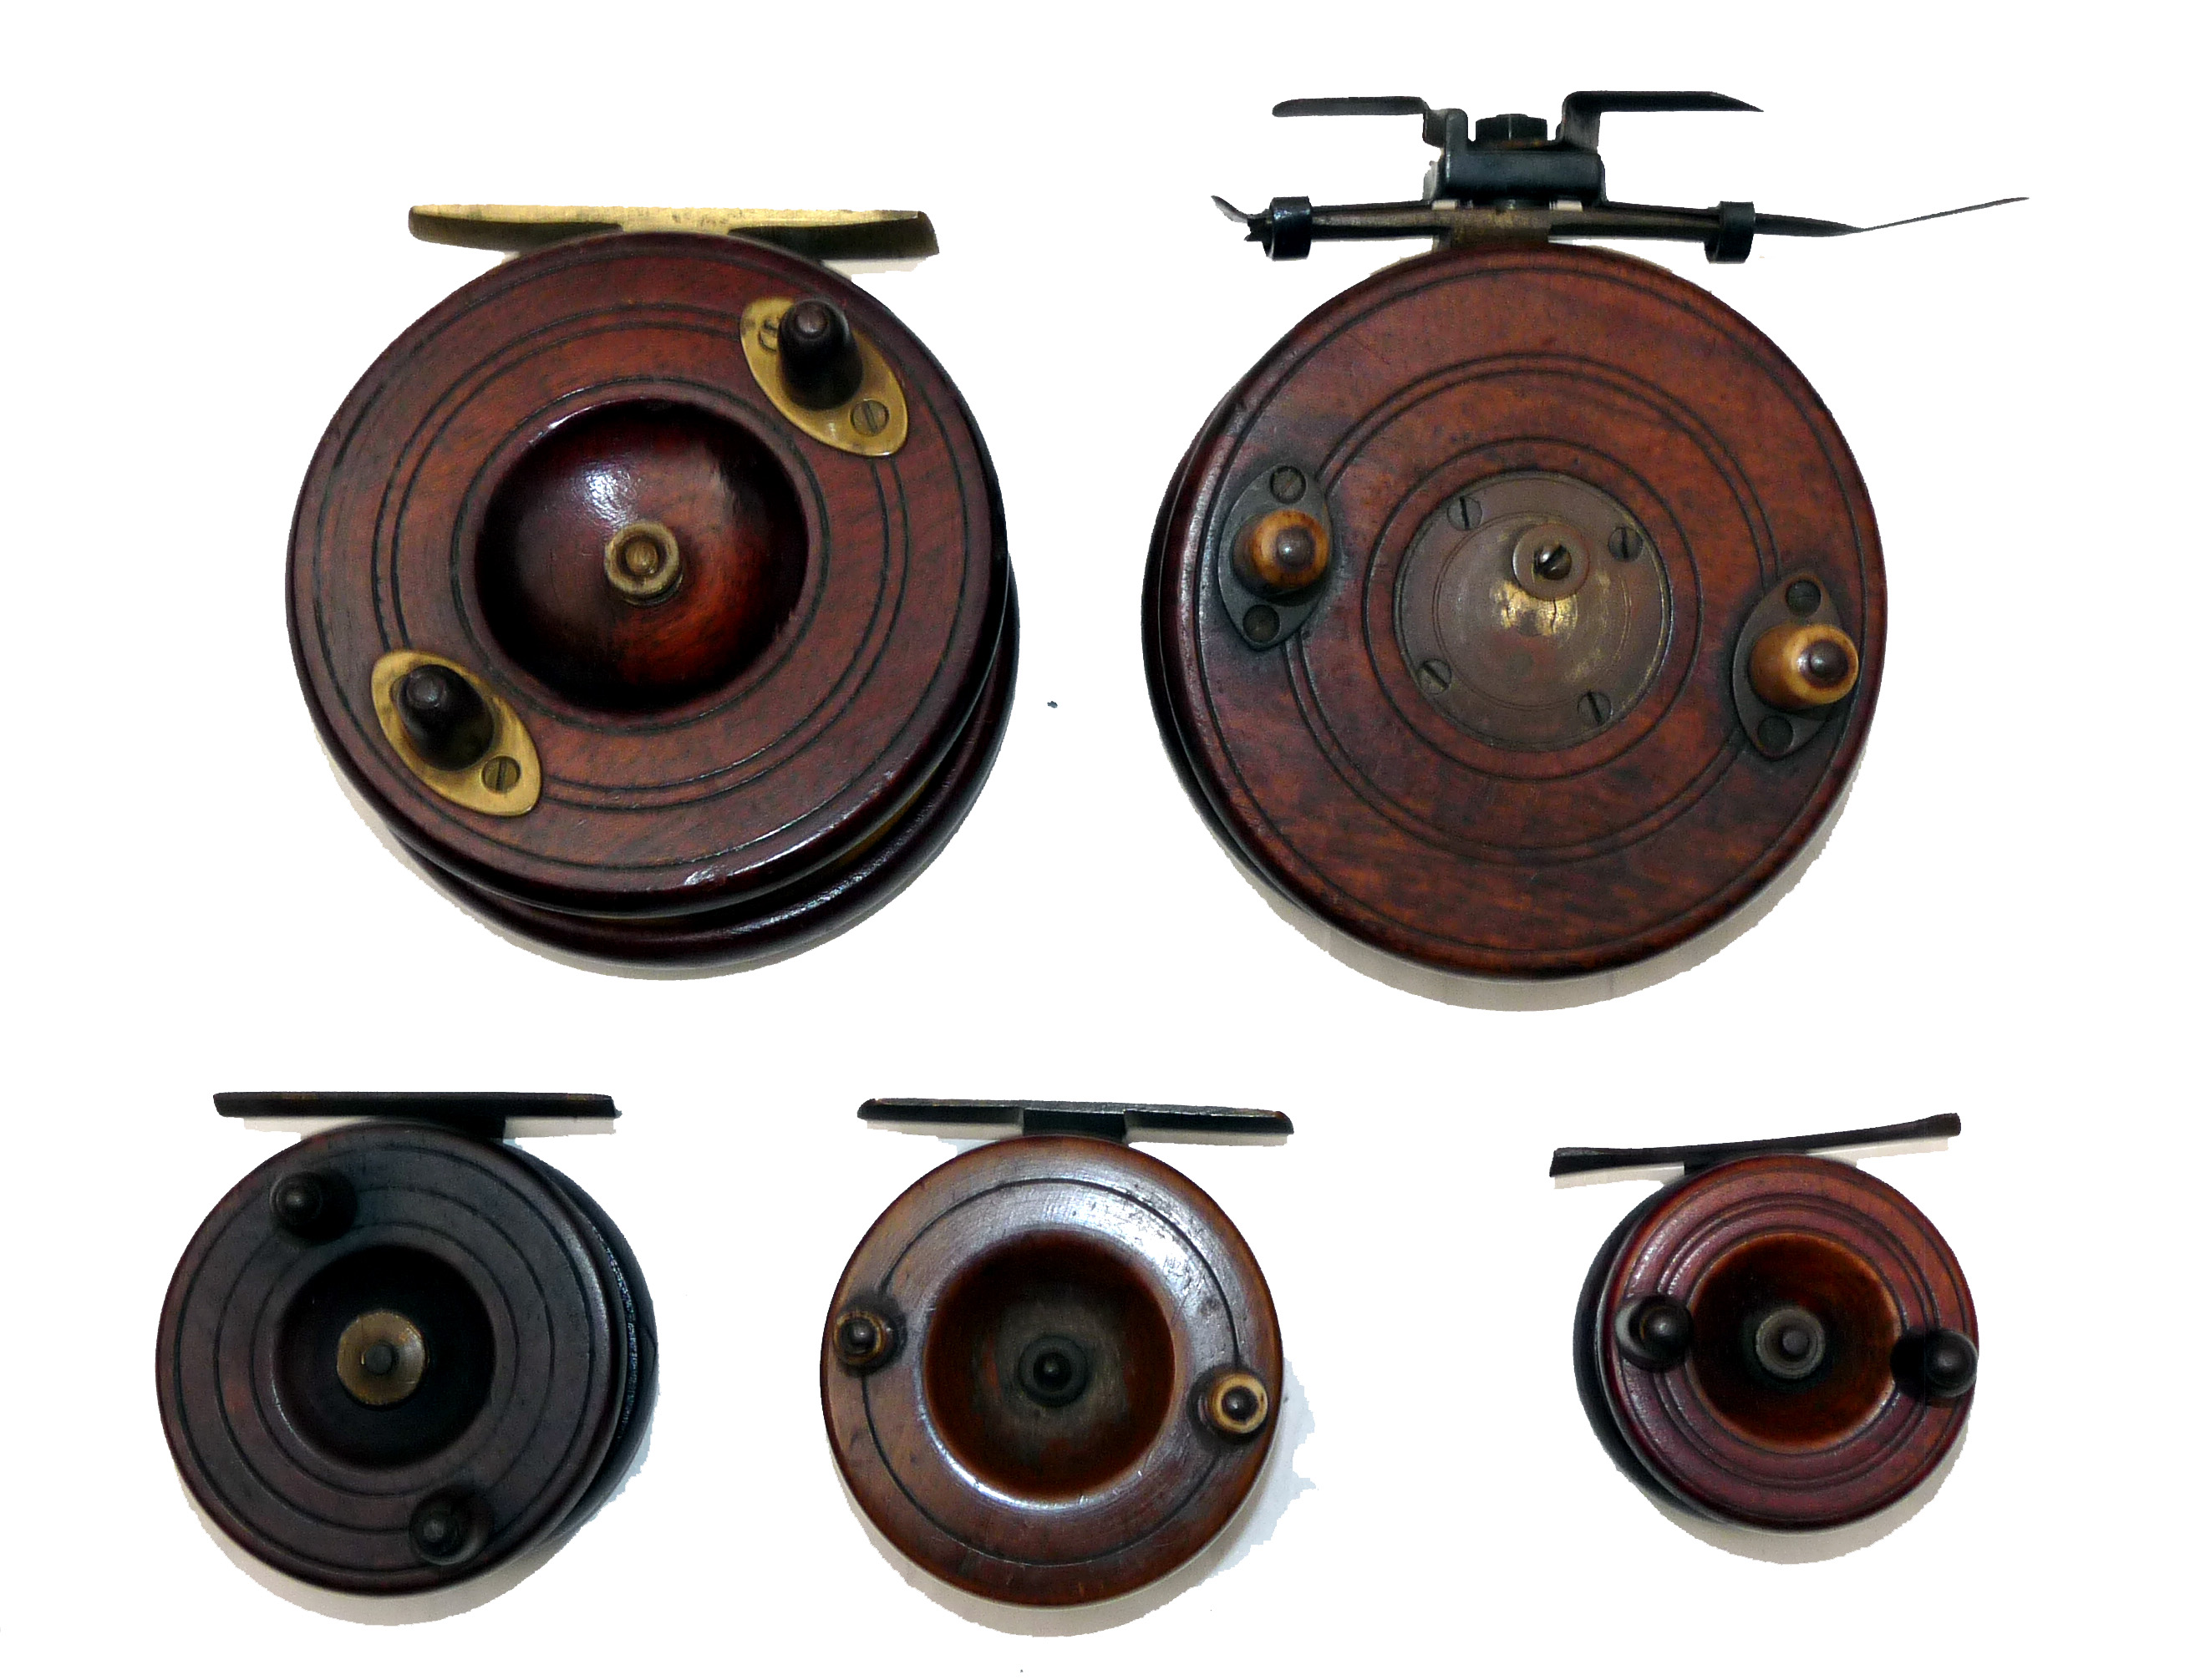 REELS (5): Collection of 5 Nottingham wood/brass reels comprising a 4” Slater pattern mahogany/brass